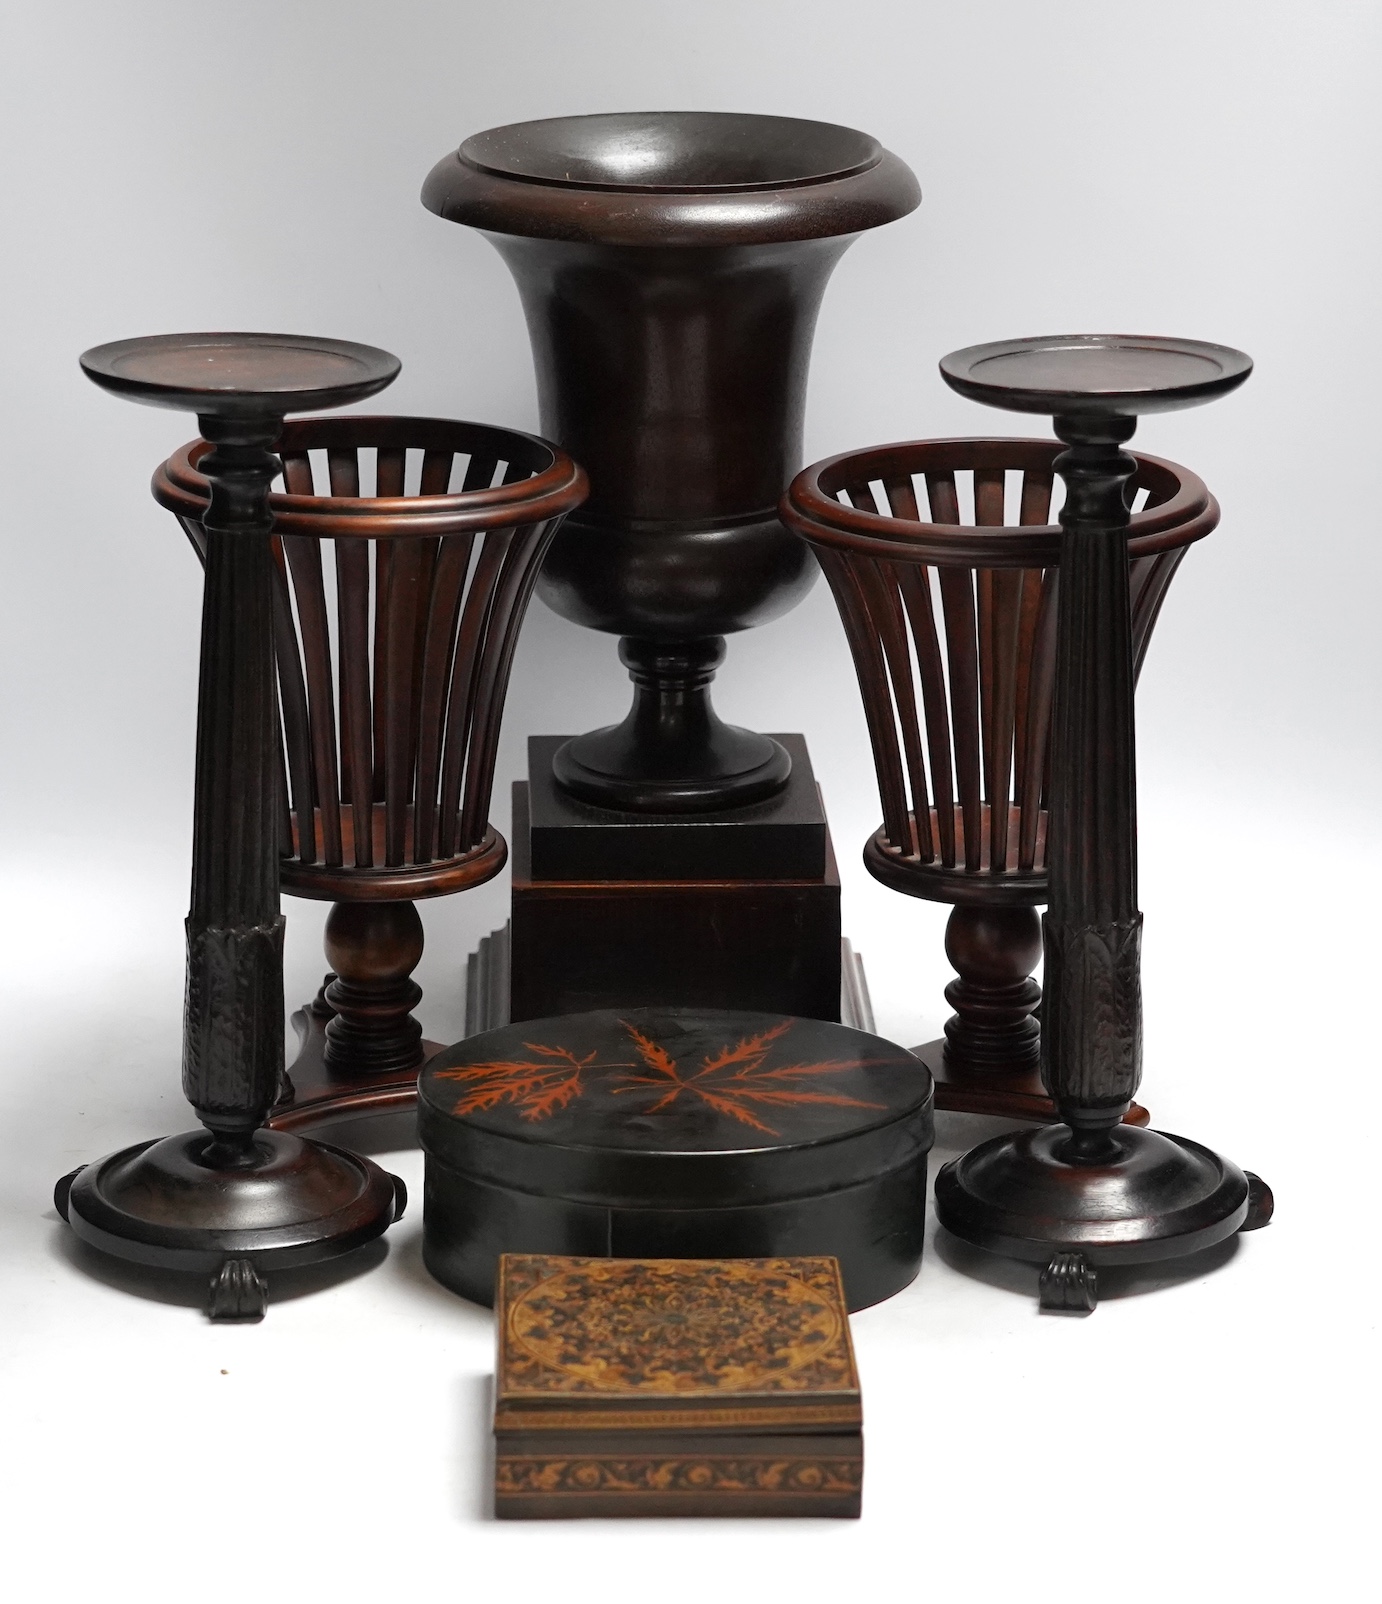 A mixed group of decorative treen effects, tall vases, candle stands etc, tallest 36cm